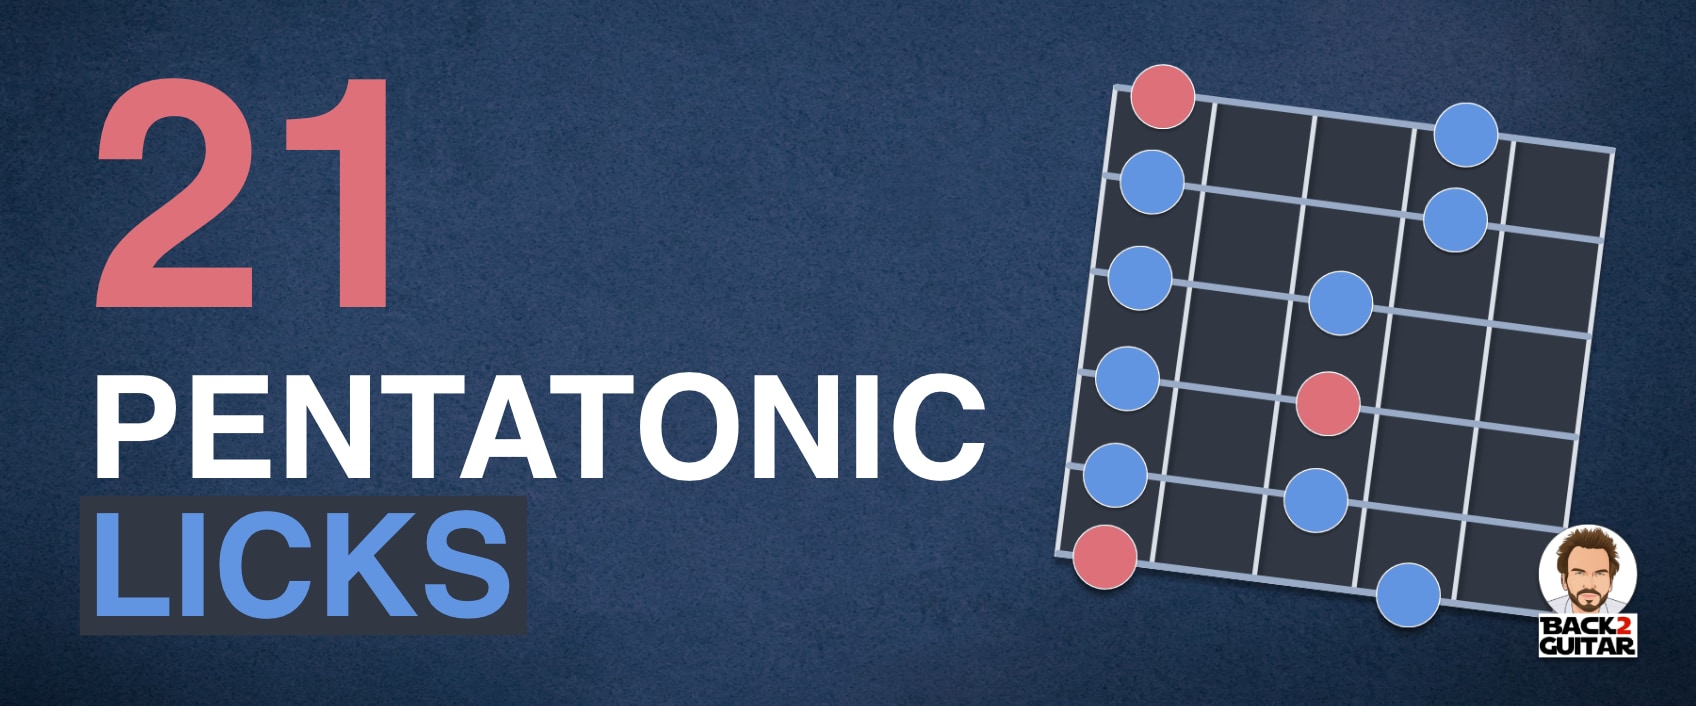 Pentatonic Scales - Guitar Lessons With Charts & Theory